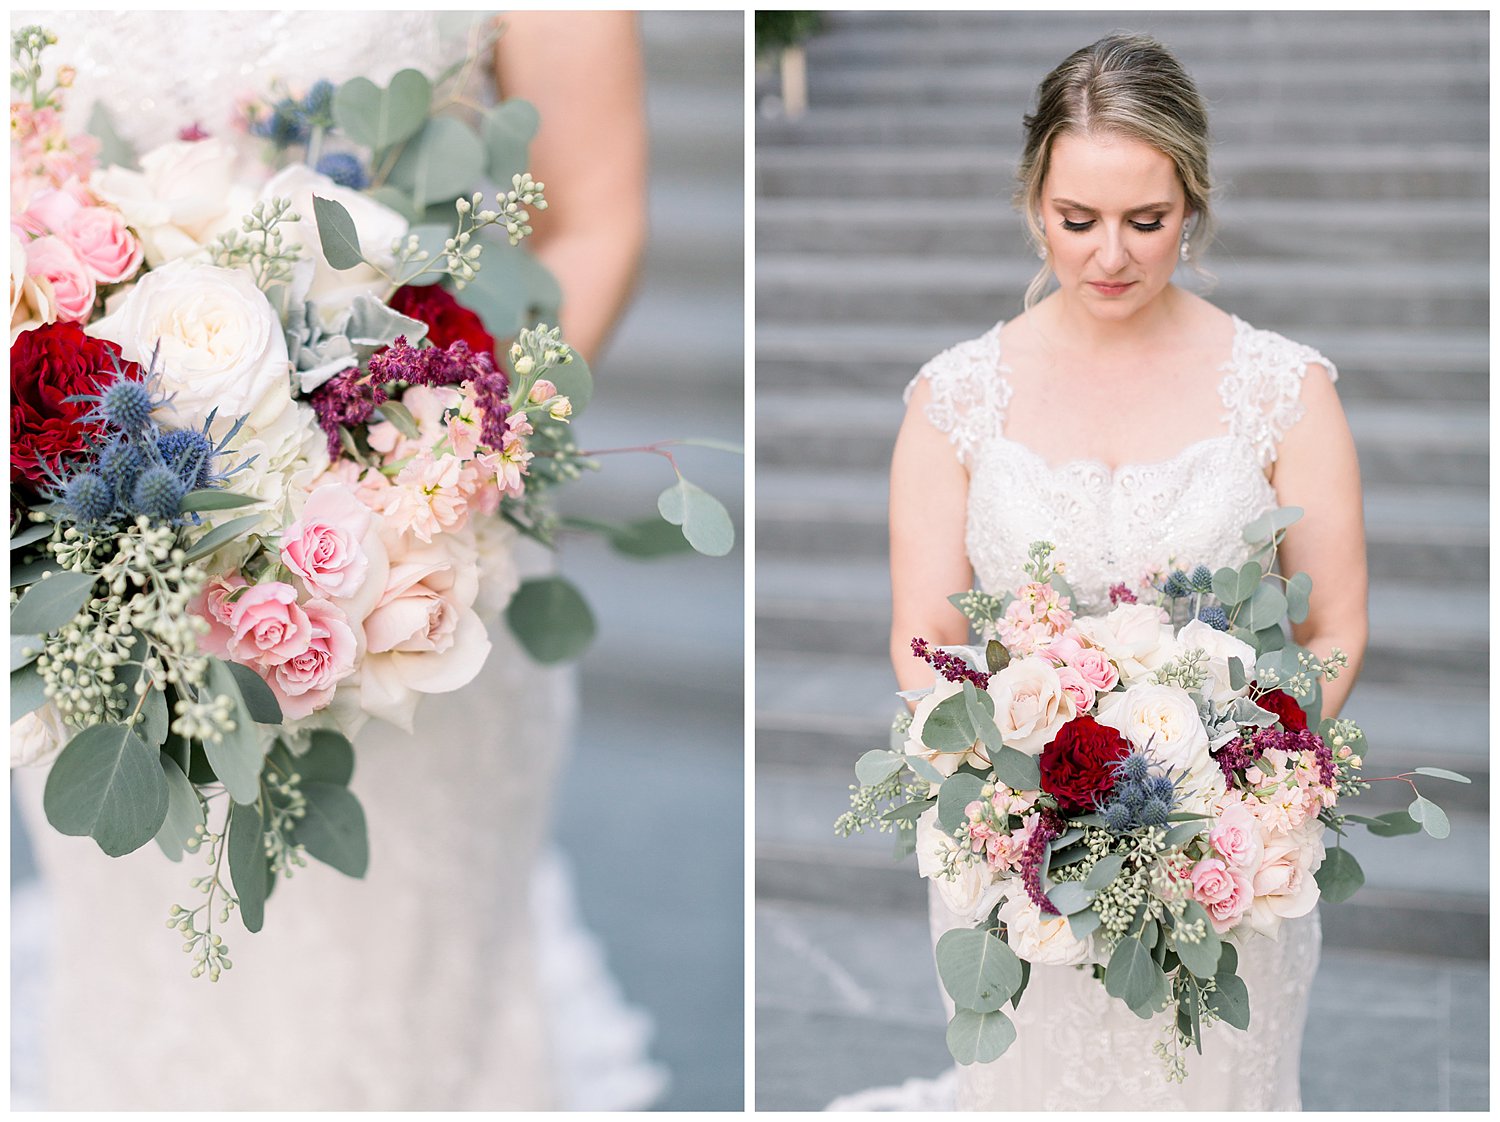 Red, white, greenery and blue wedding bouquet photos